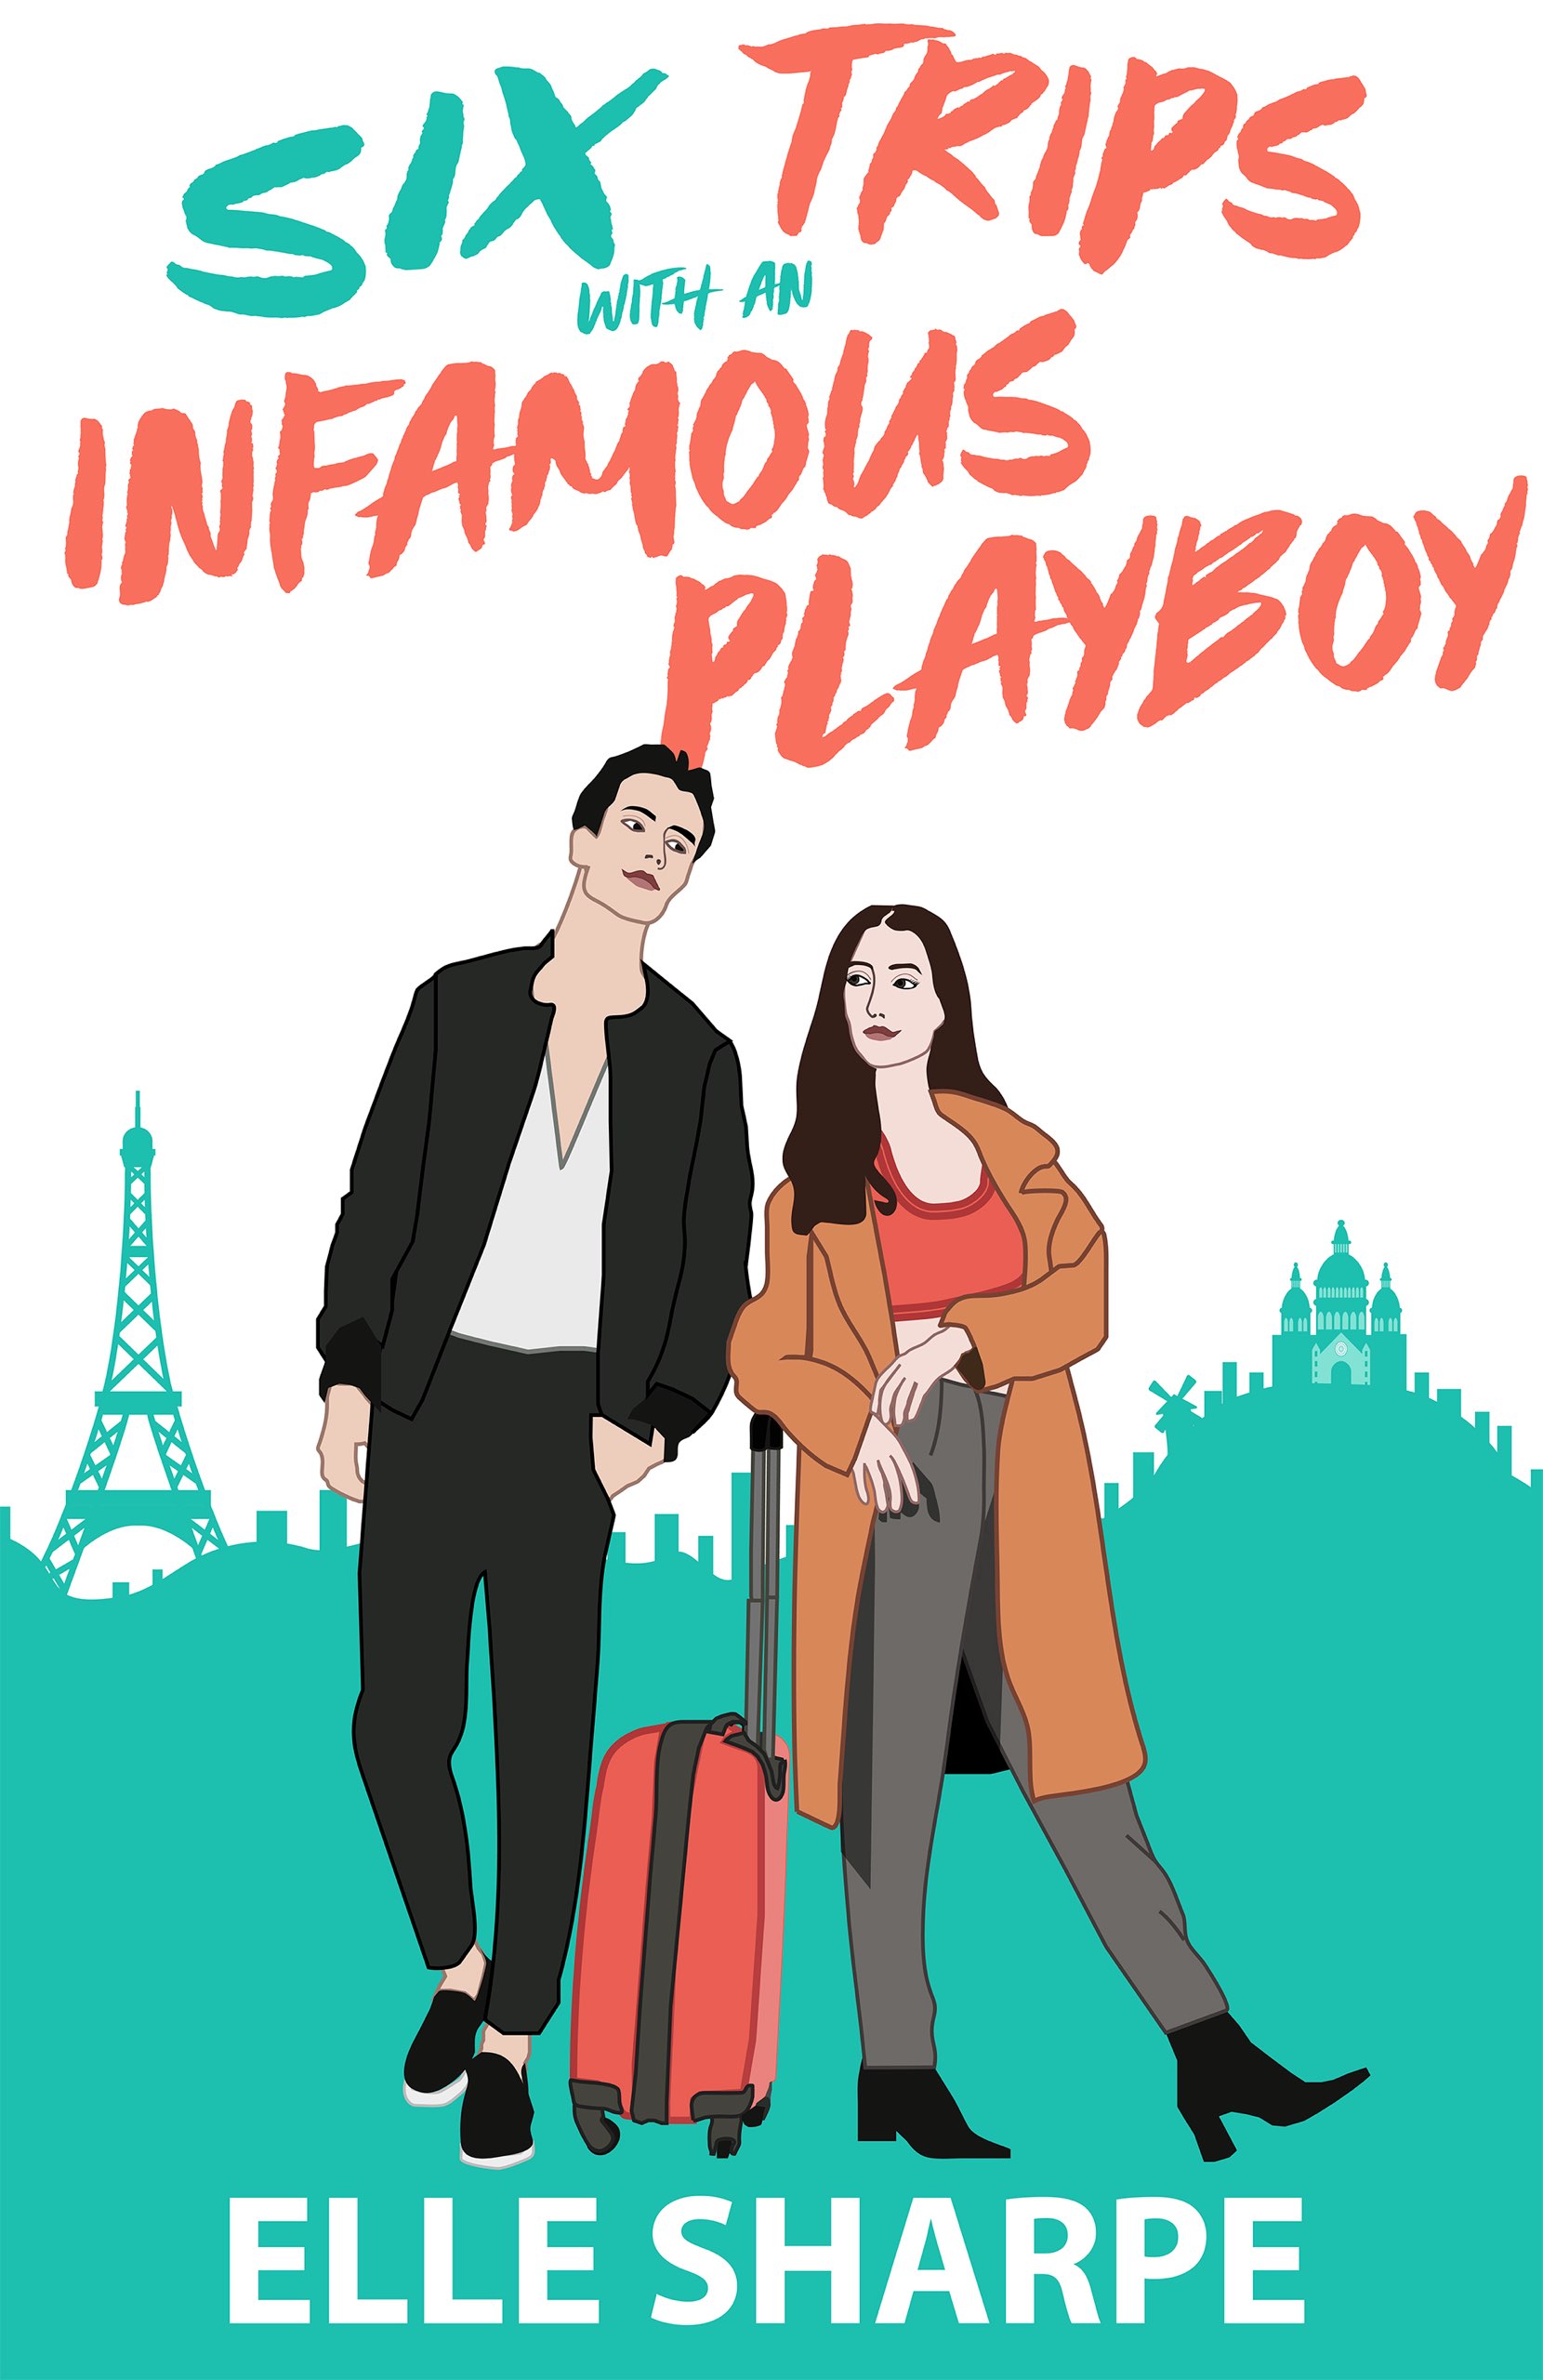 Six Trips with an Infamous Playboy